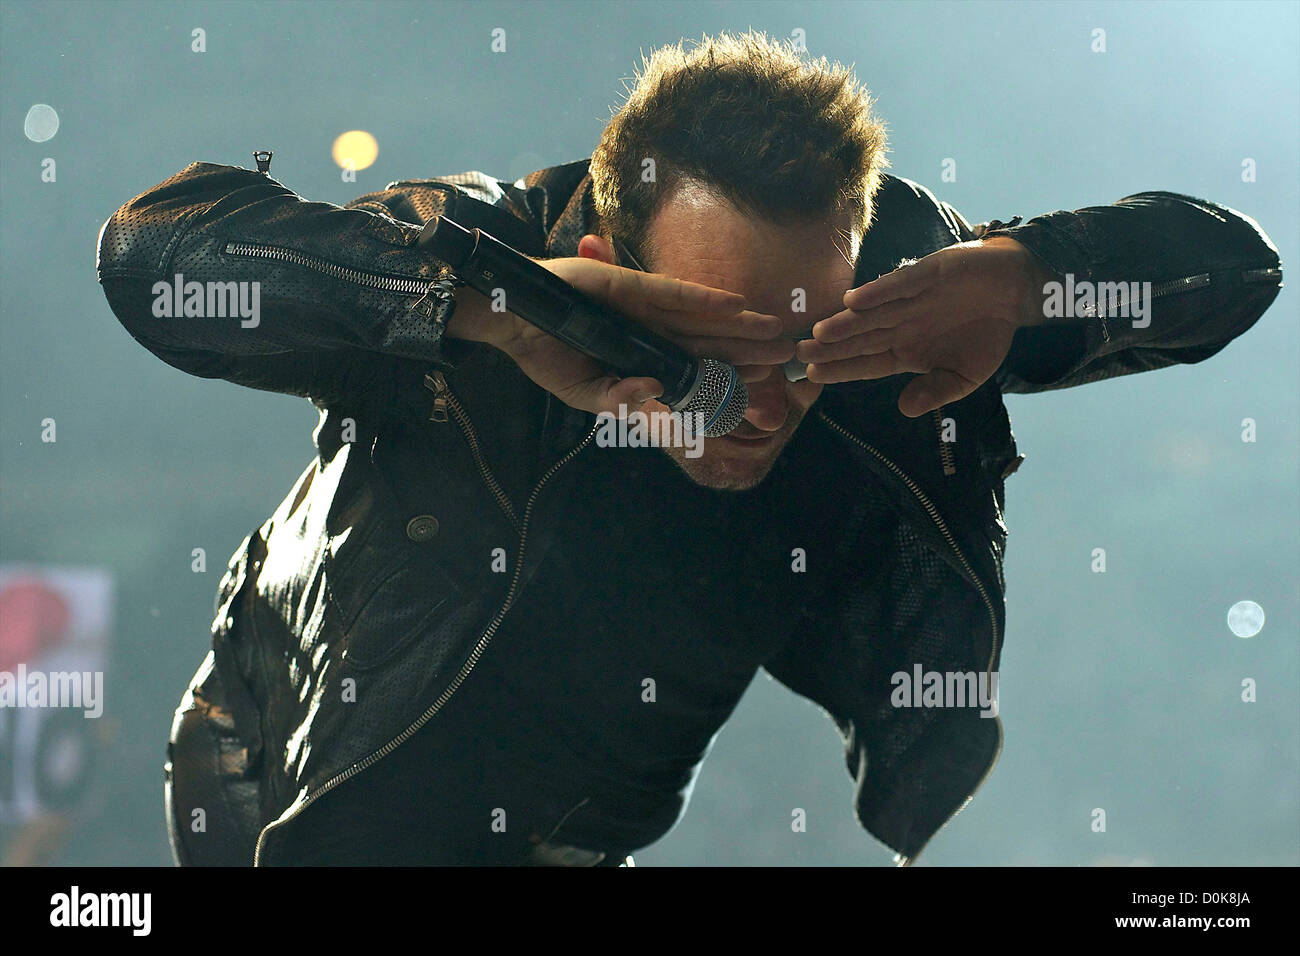 Bono of rock band U2 performs on stage during the U2 360 Tour concert at the Estadio Olimpico. Seville, Spain - 30.09.10 Stock Photo